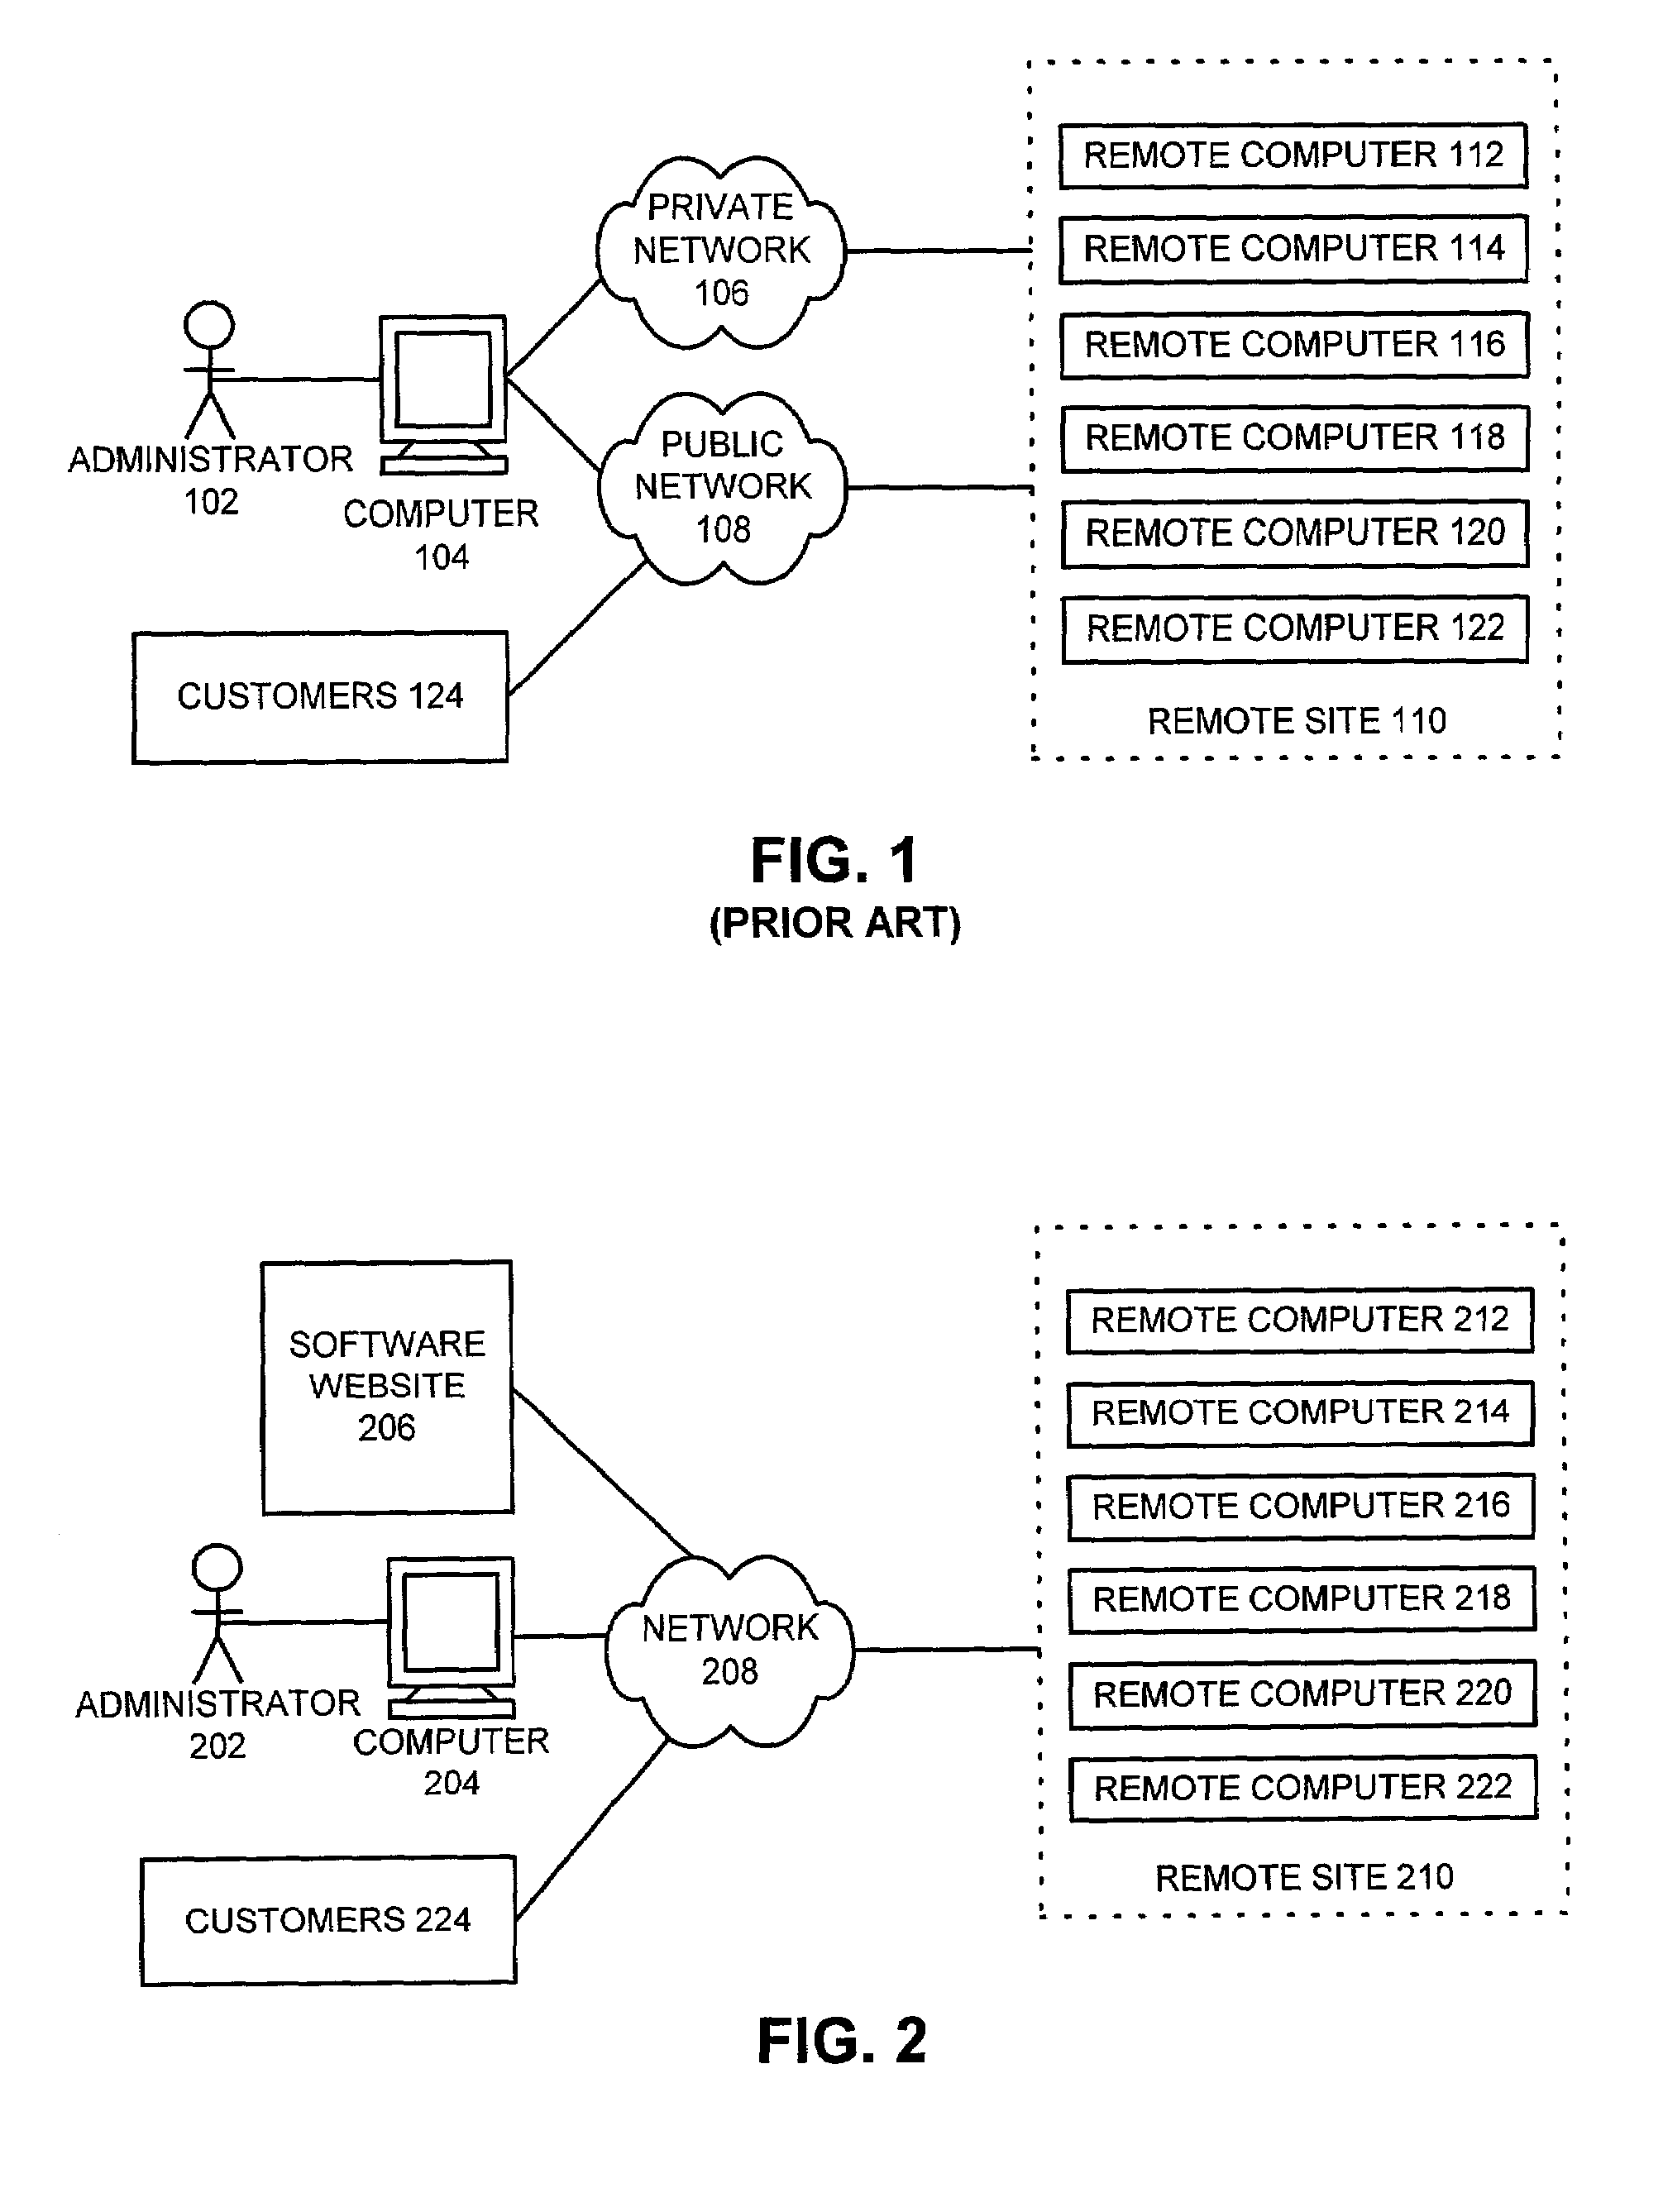 Method and apparatus to facilitate automated software installation on remote computers over a network